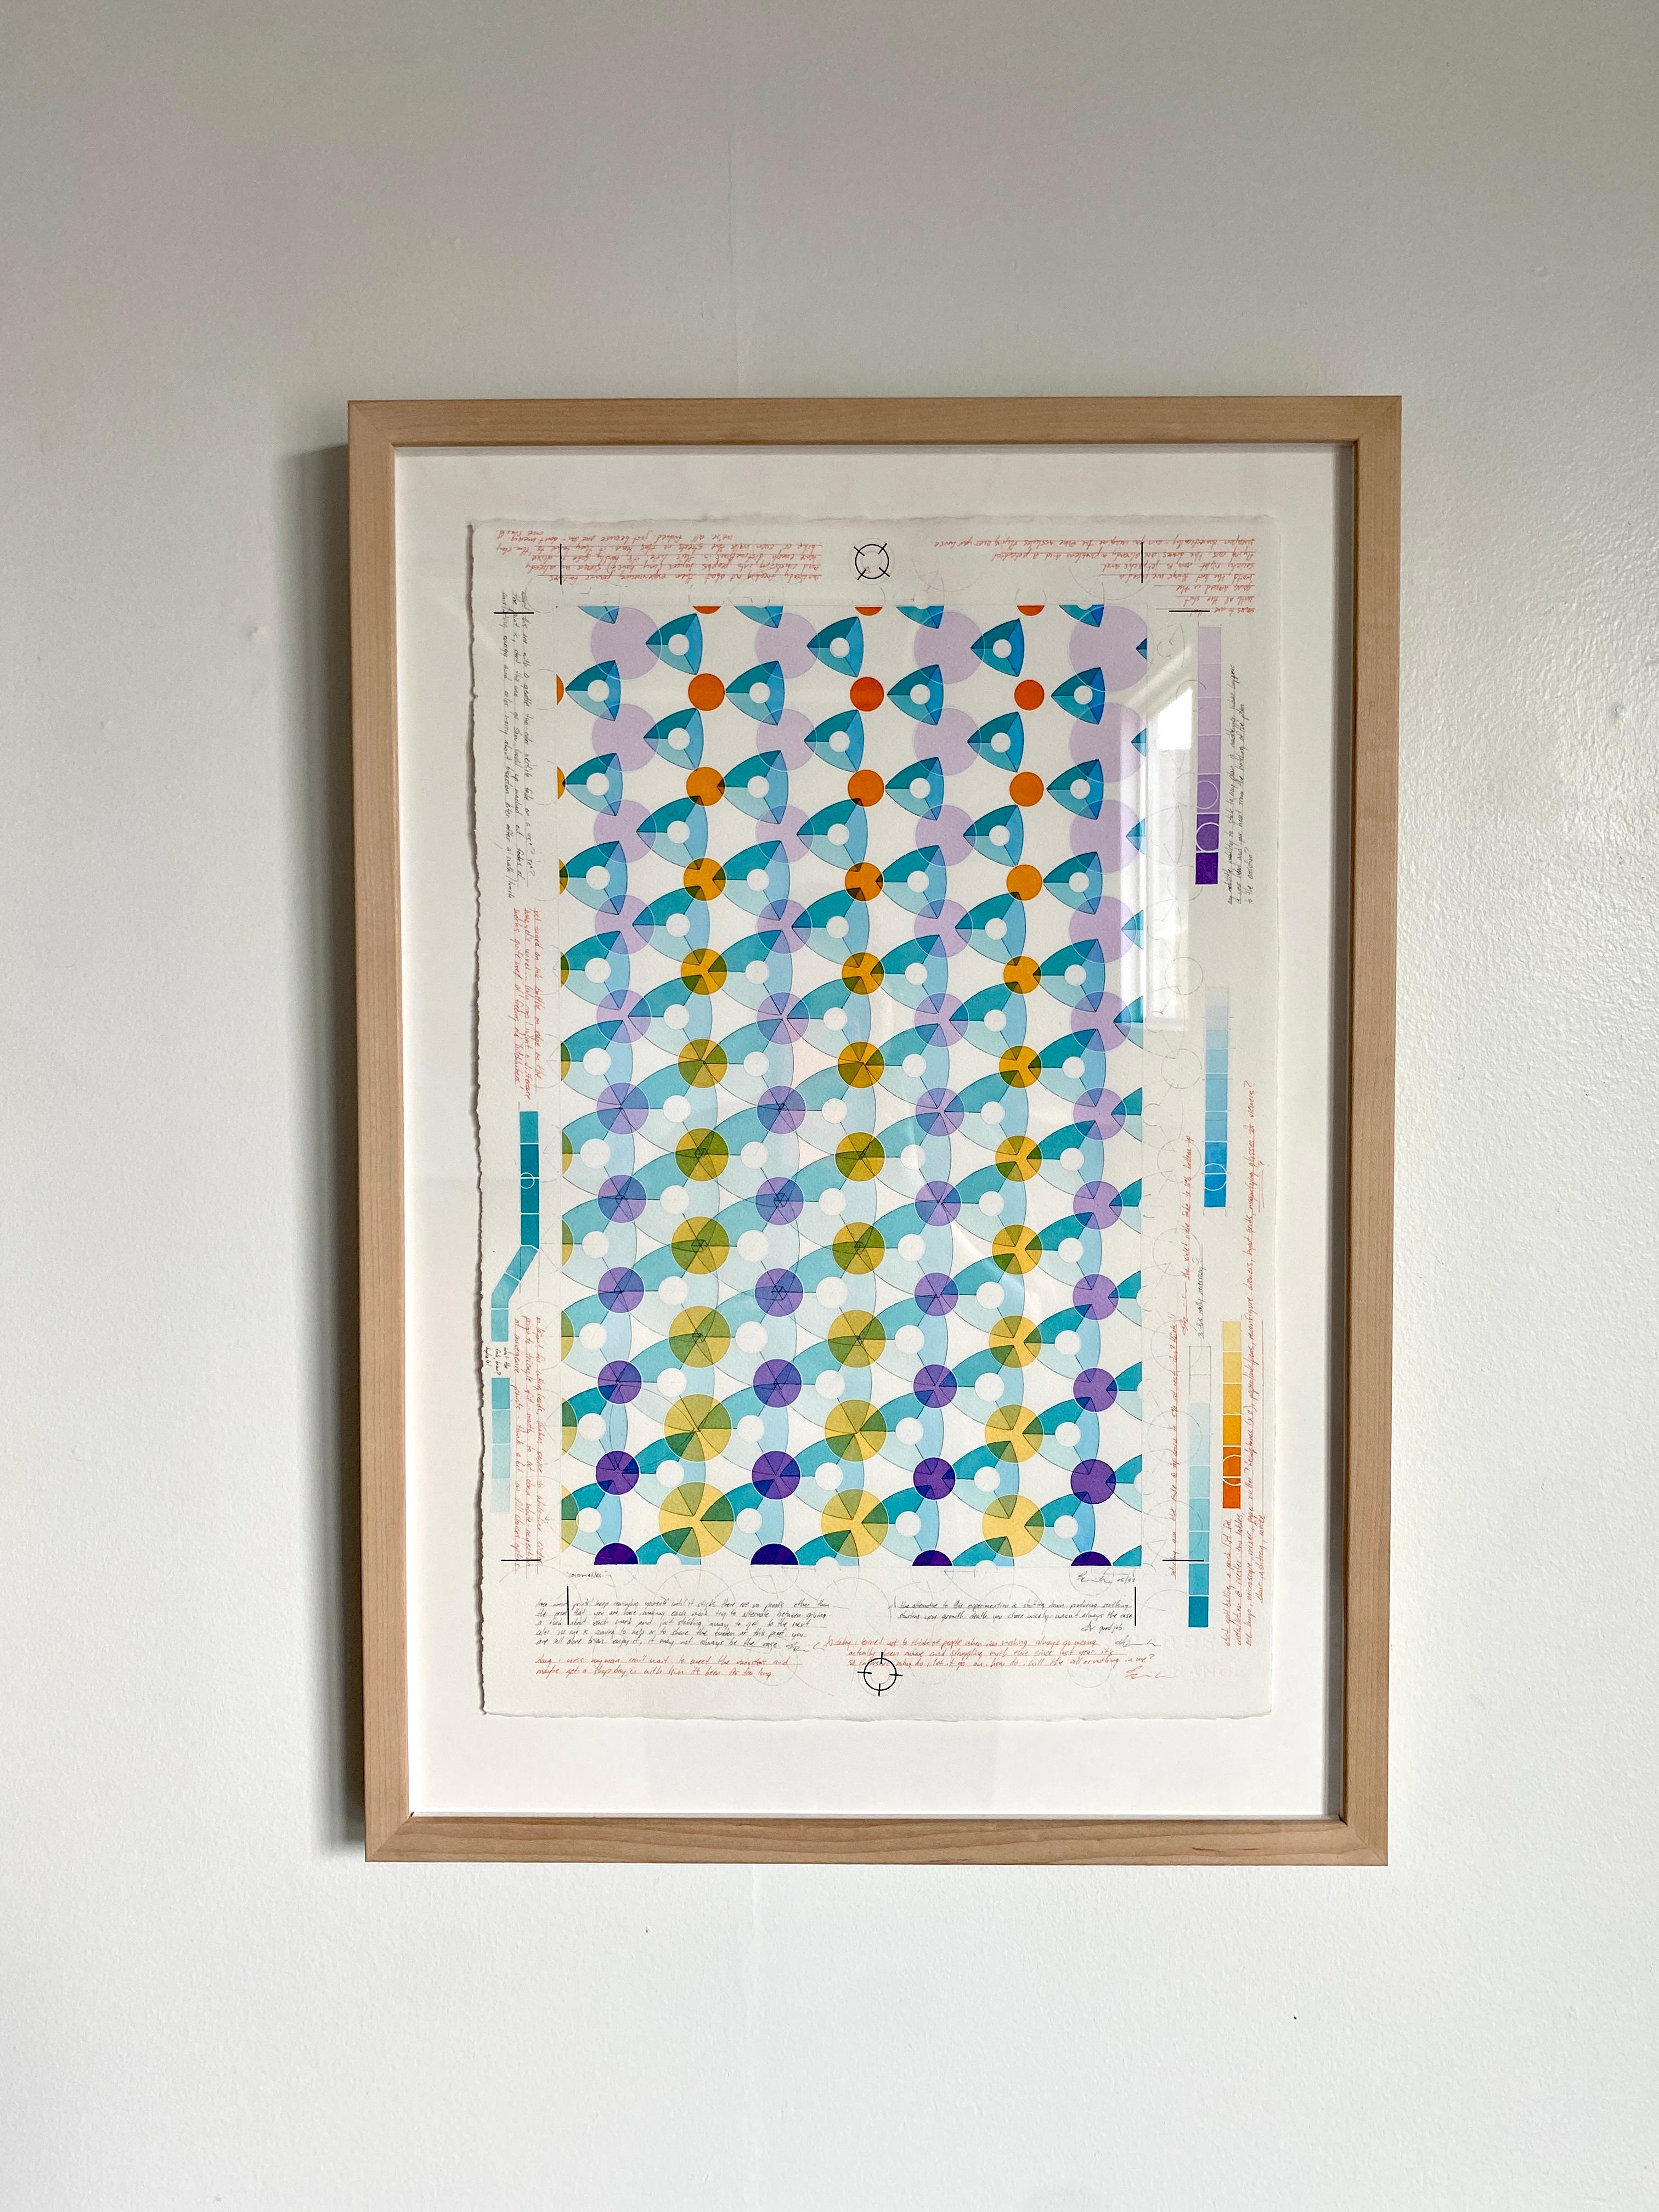 Consumables, Contemporary Acrylic Ink on Paper, Geometric Abstract, Framed - Art by Brian Daly